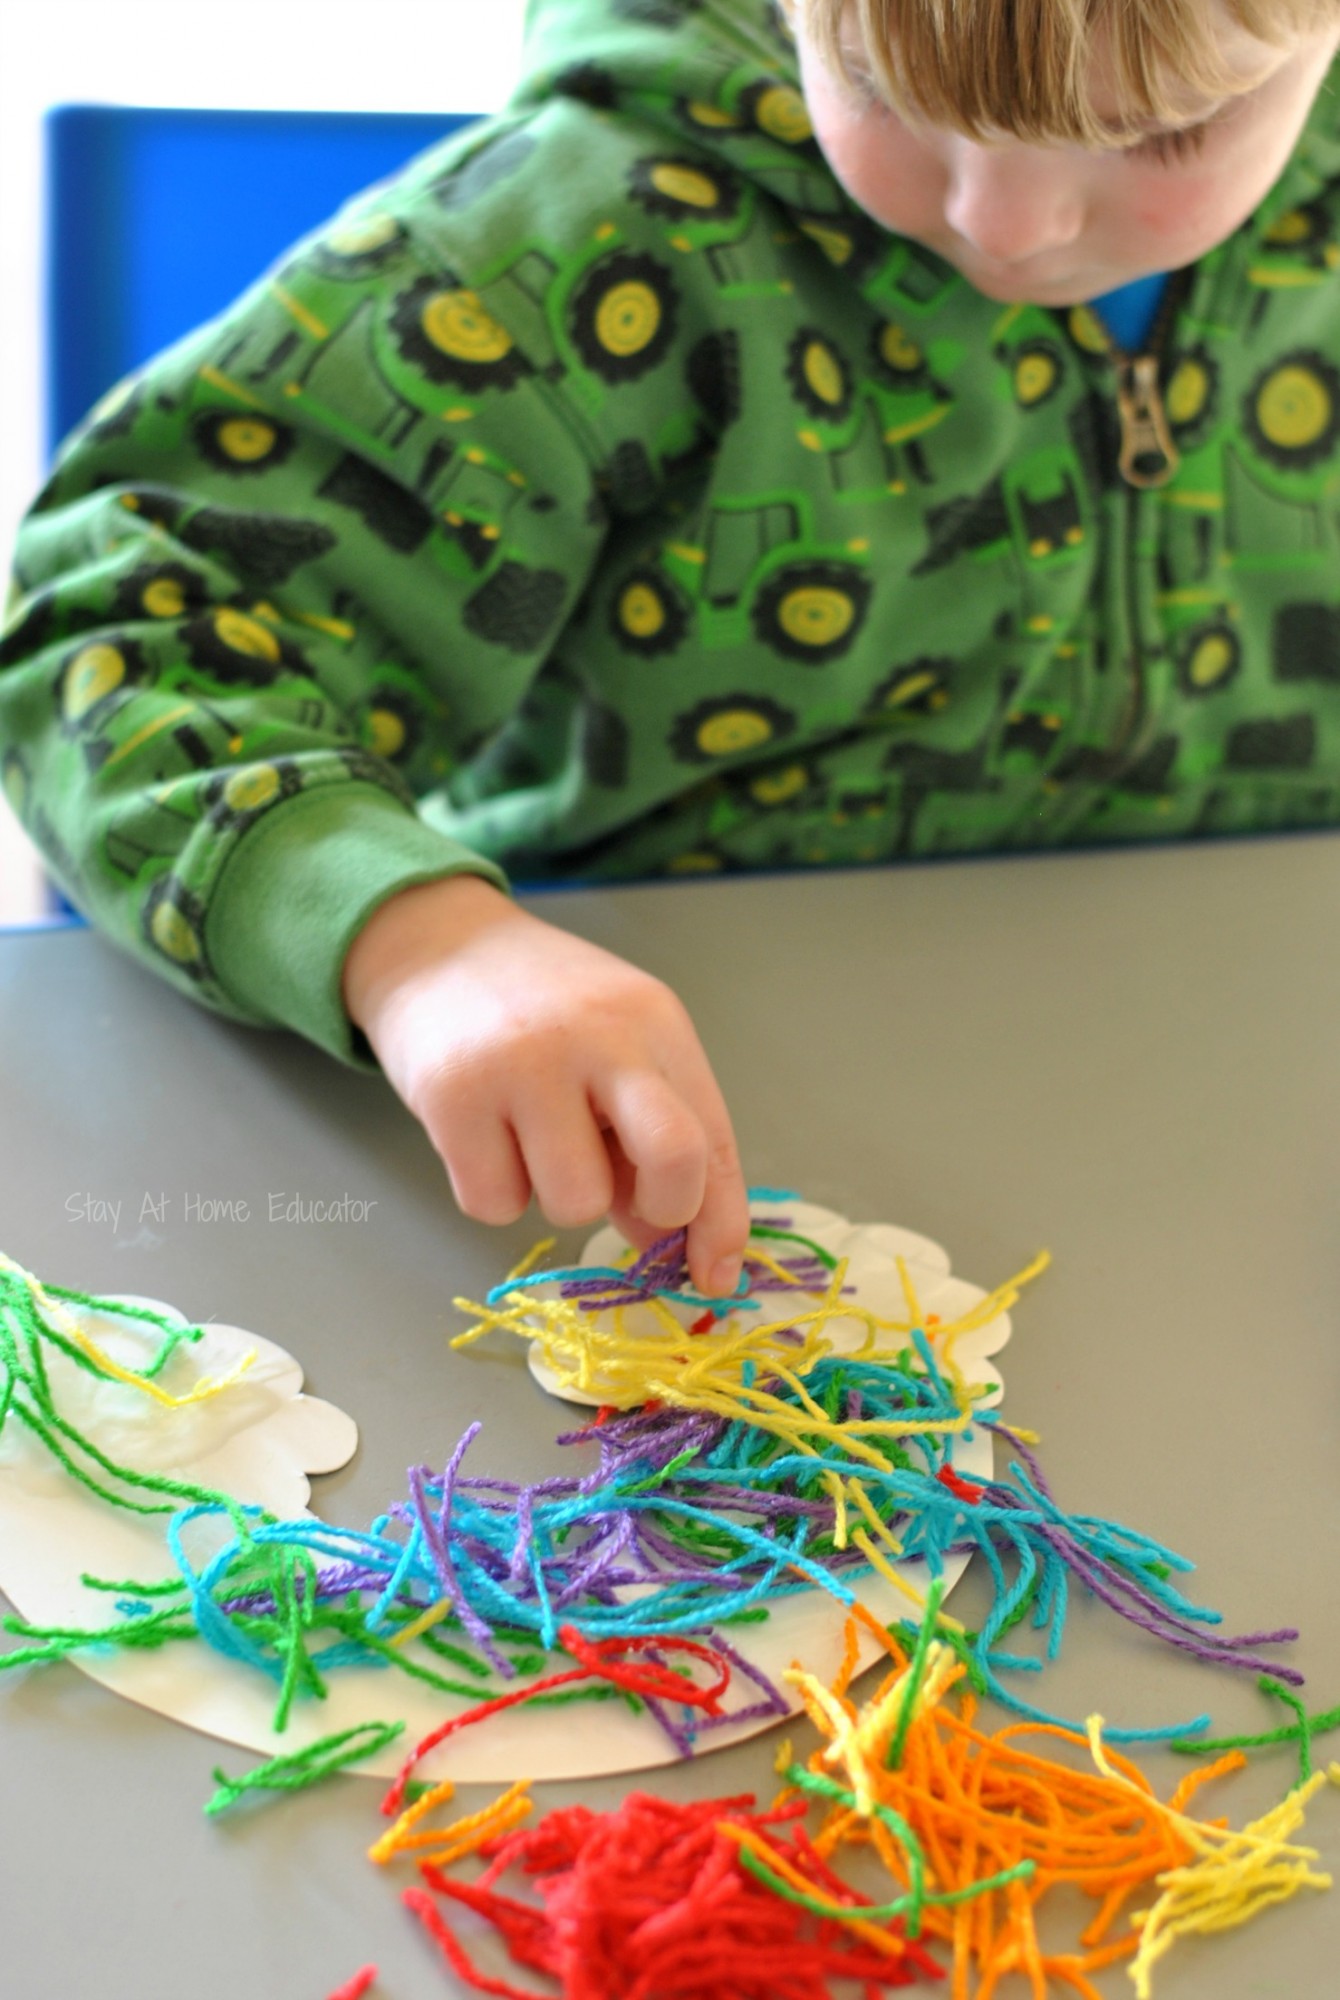 Yarn rainbow craft for three year olds - Snipped yarn rainbows, a fine motor craft for preschoolers  - work on hand strength, fine motor skills, and scissor cutting practice while doing a rainbow craft for preschoolers. Add it to your st. Patrick's Day lesson plans